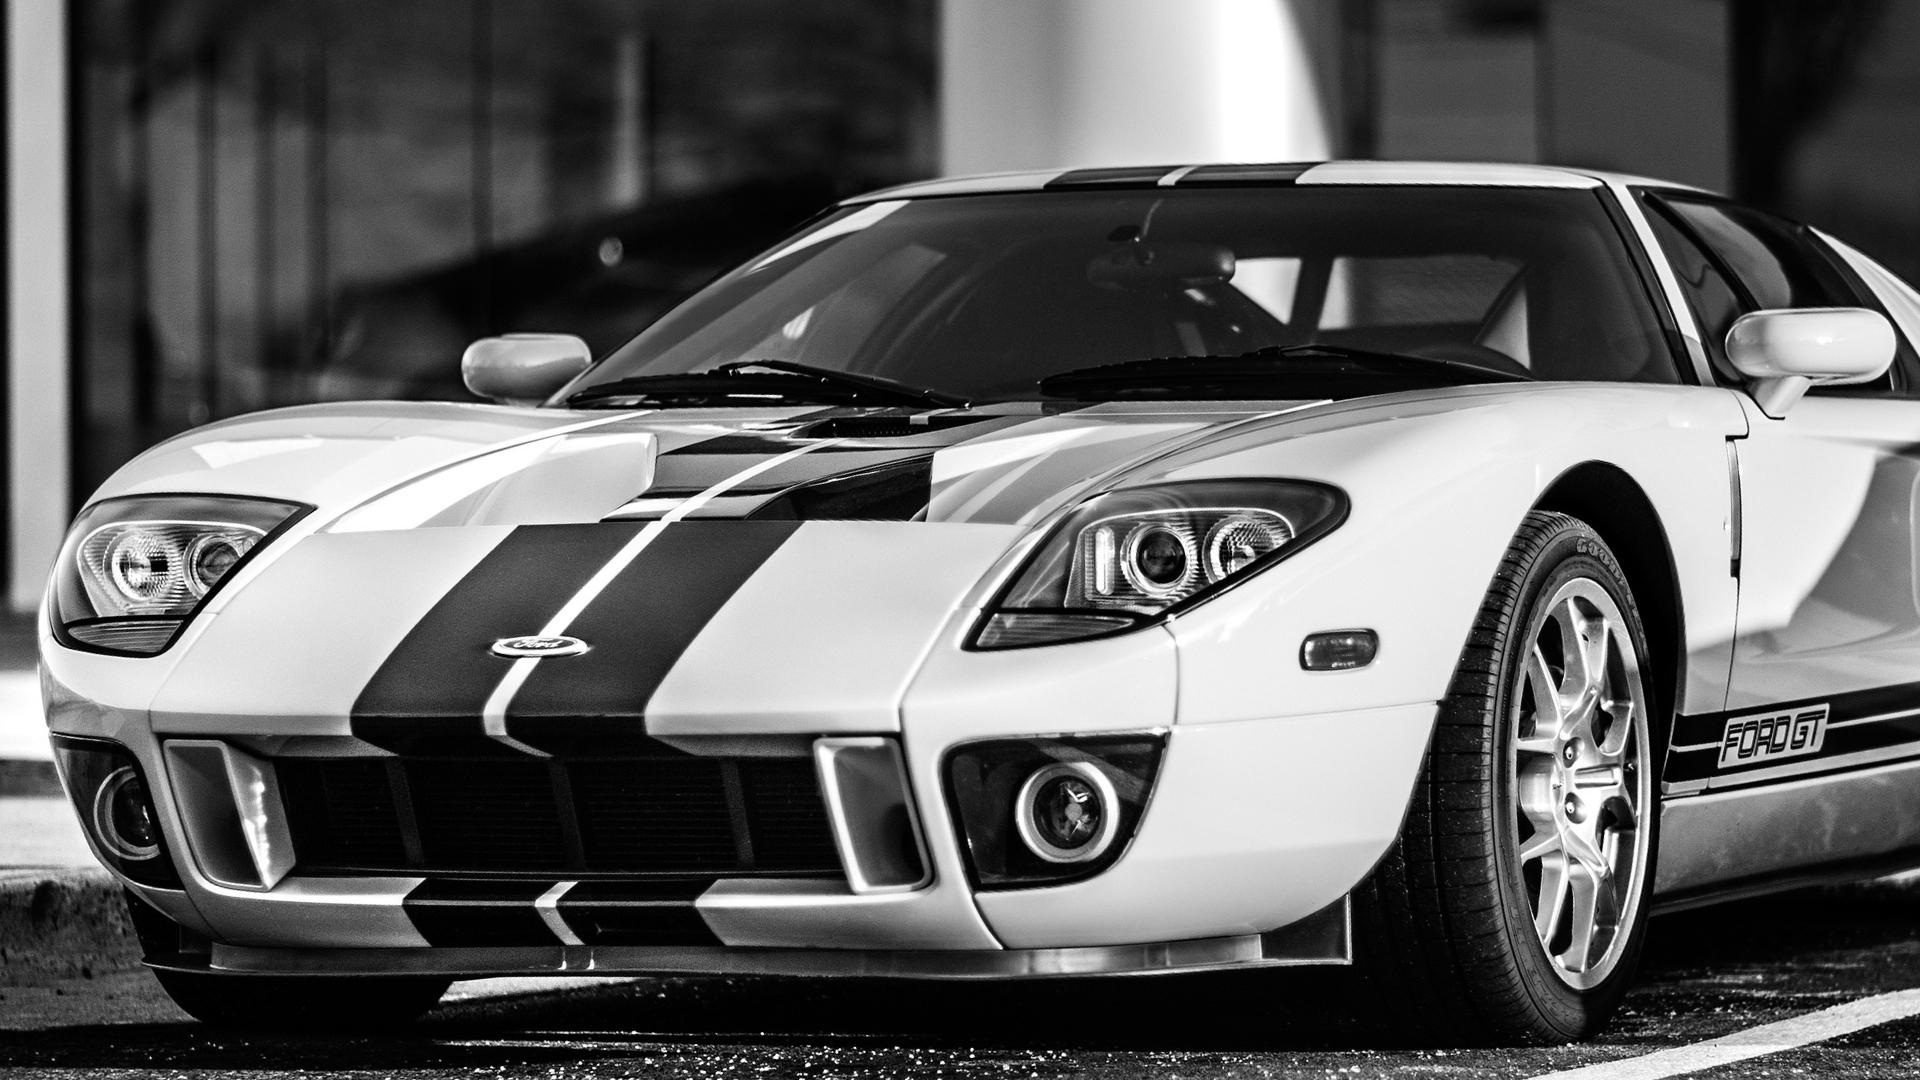 White Ford GT with Gorilla Glass windshield, black and white photo